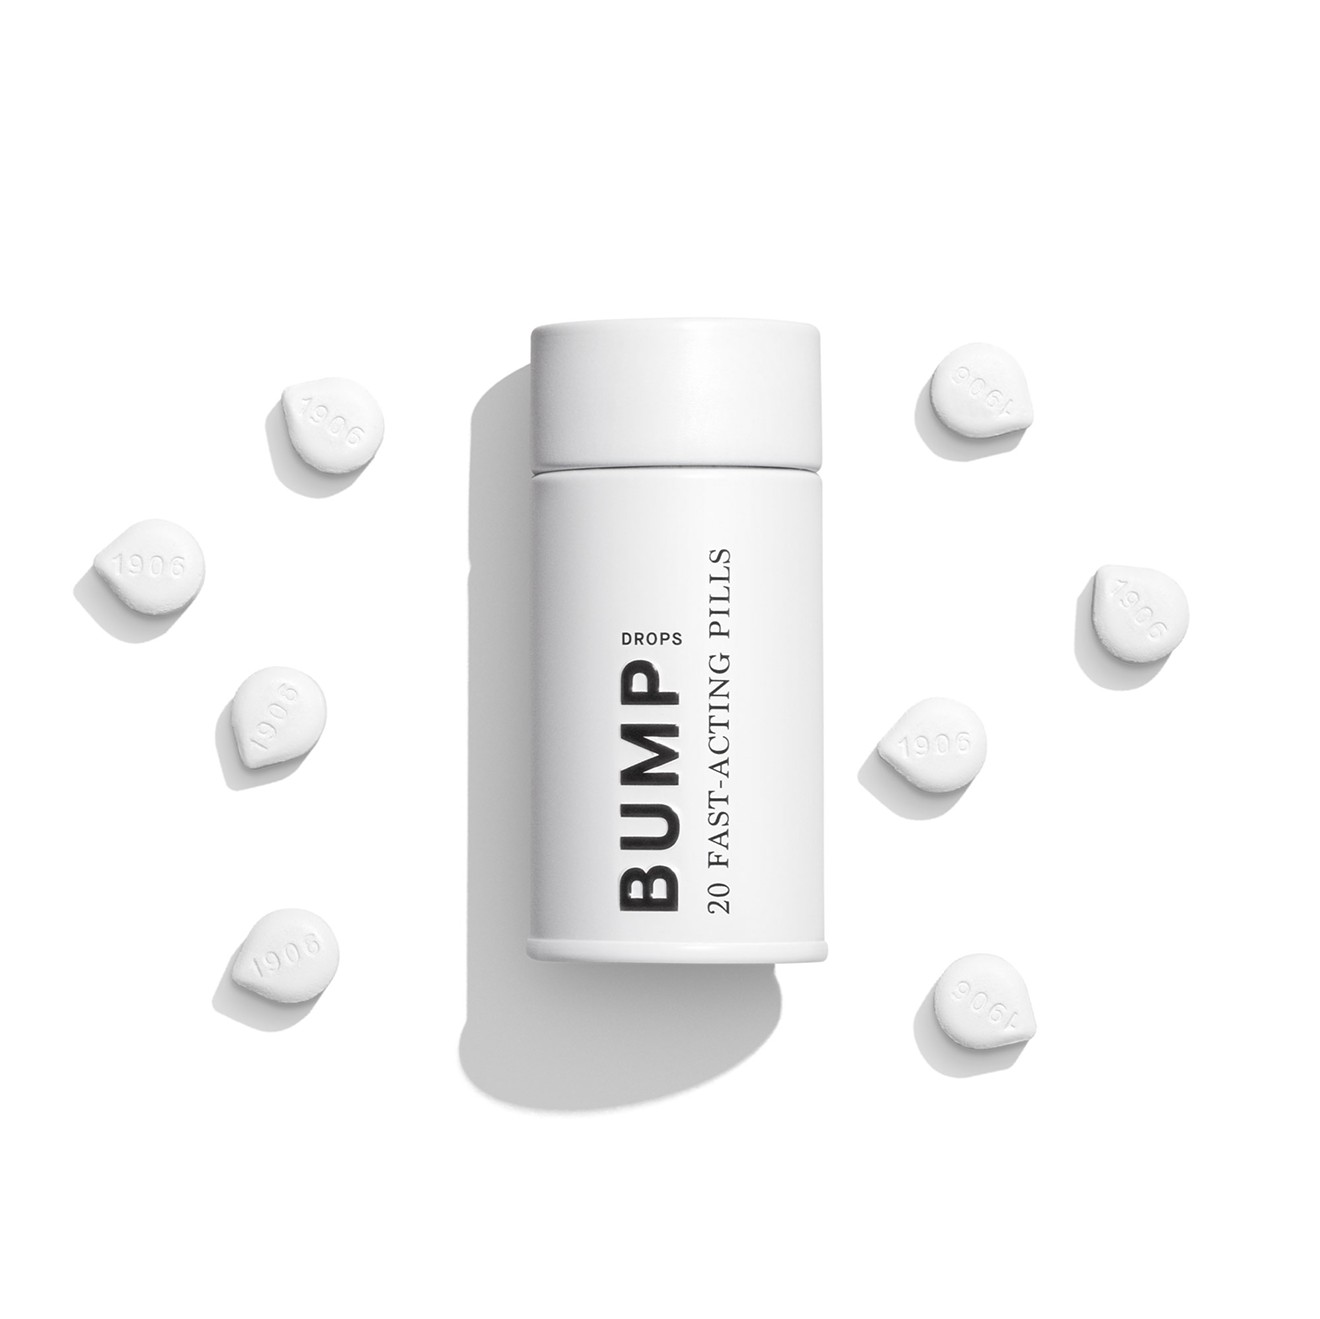 1906's Bump pills are currently in a handful of stores, and will be available statewide in several weeks.